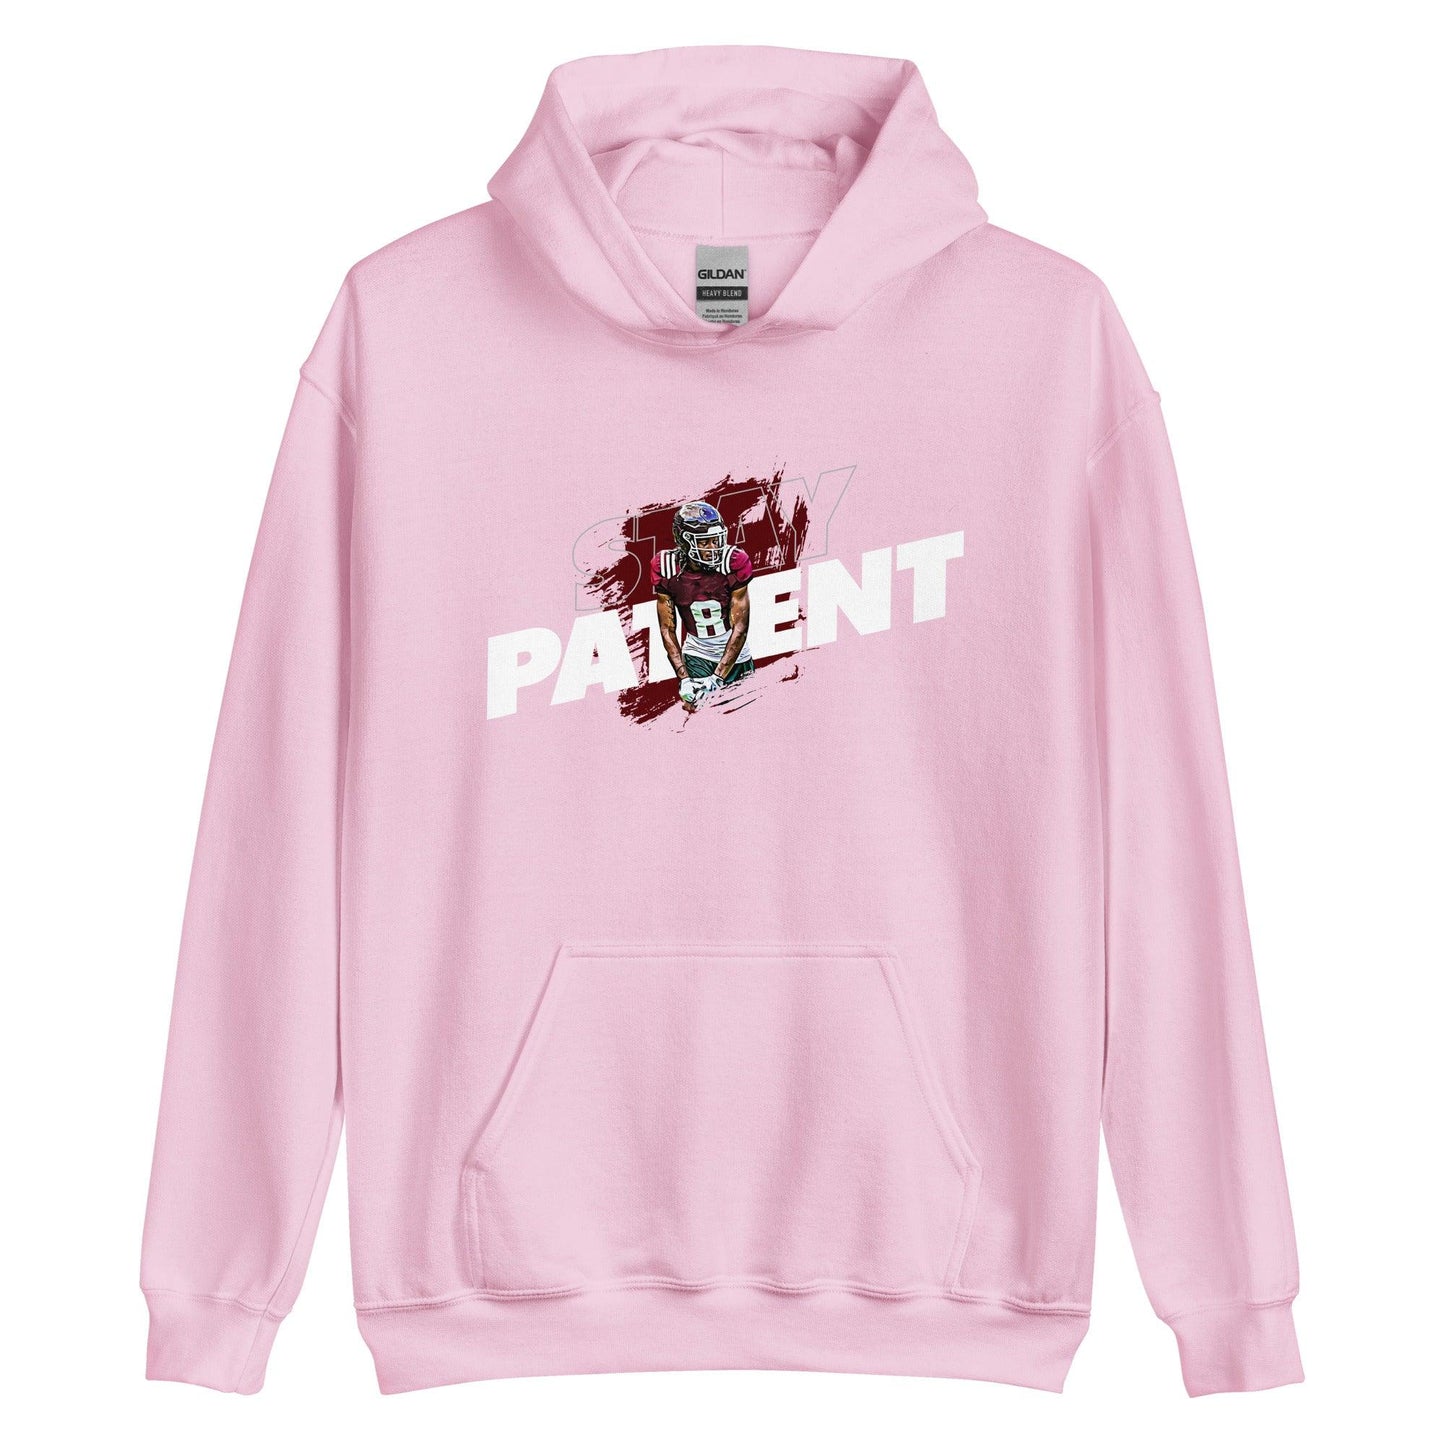 Yulkeith Brown "Stay Patient" Hoodie - Fan Arch